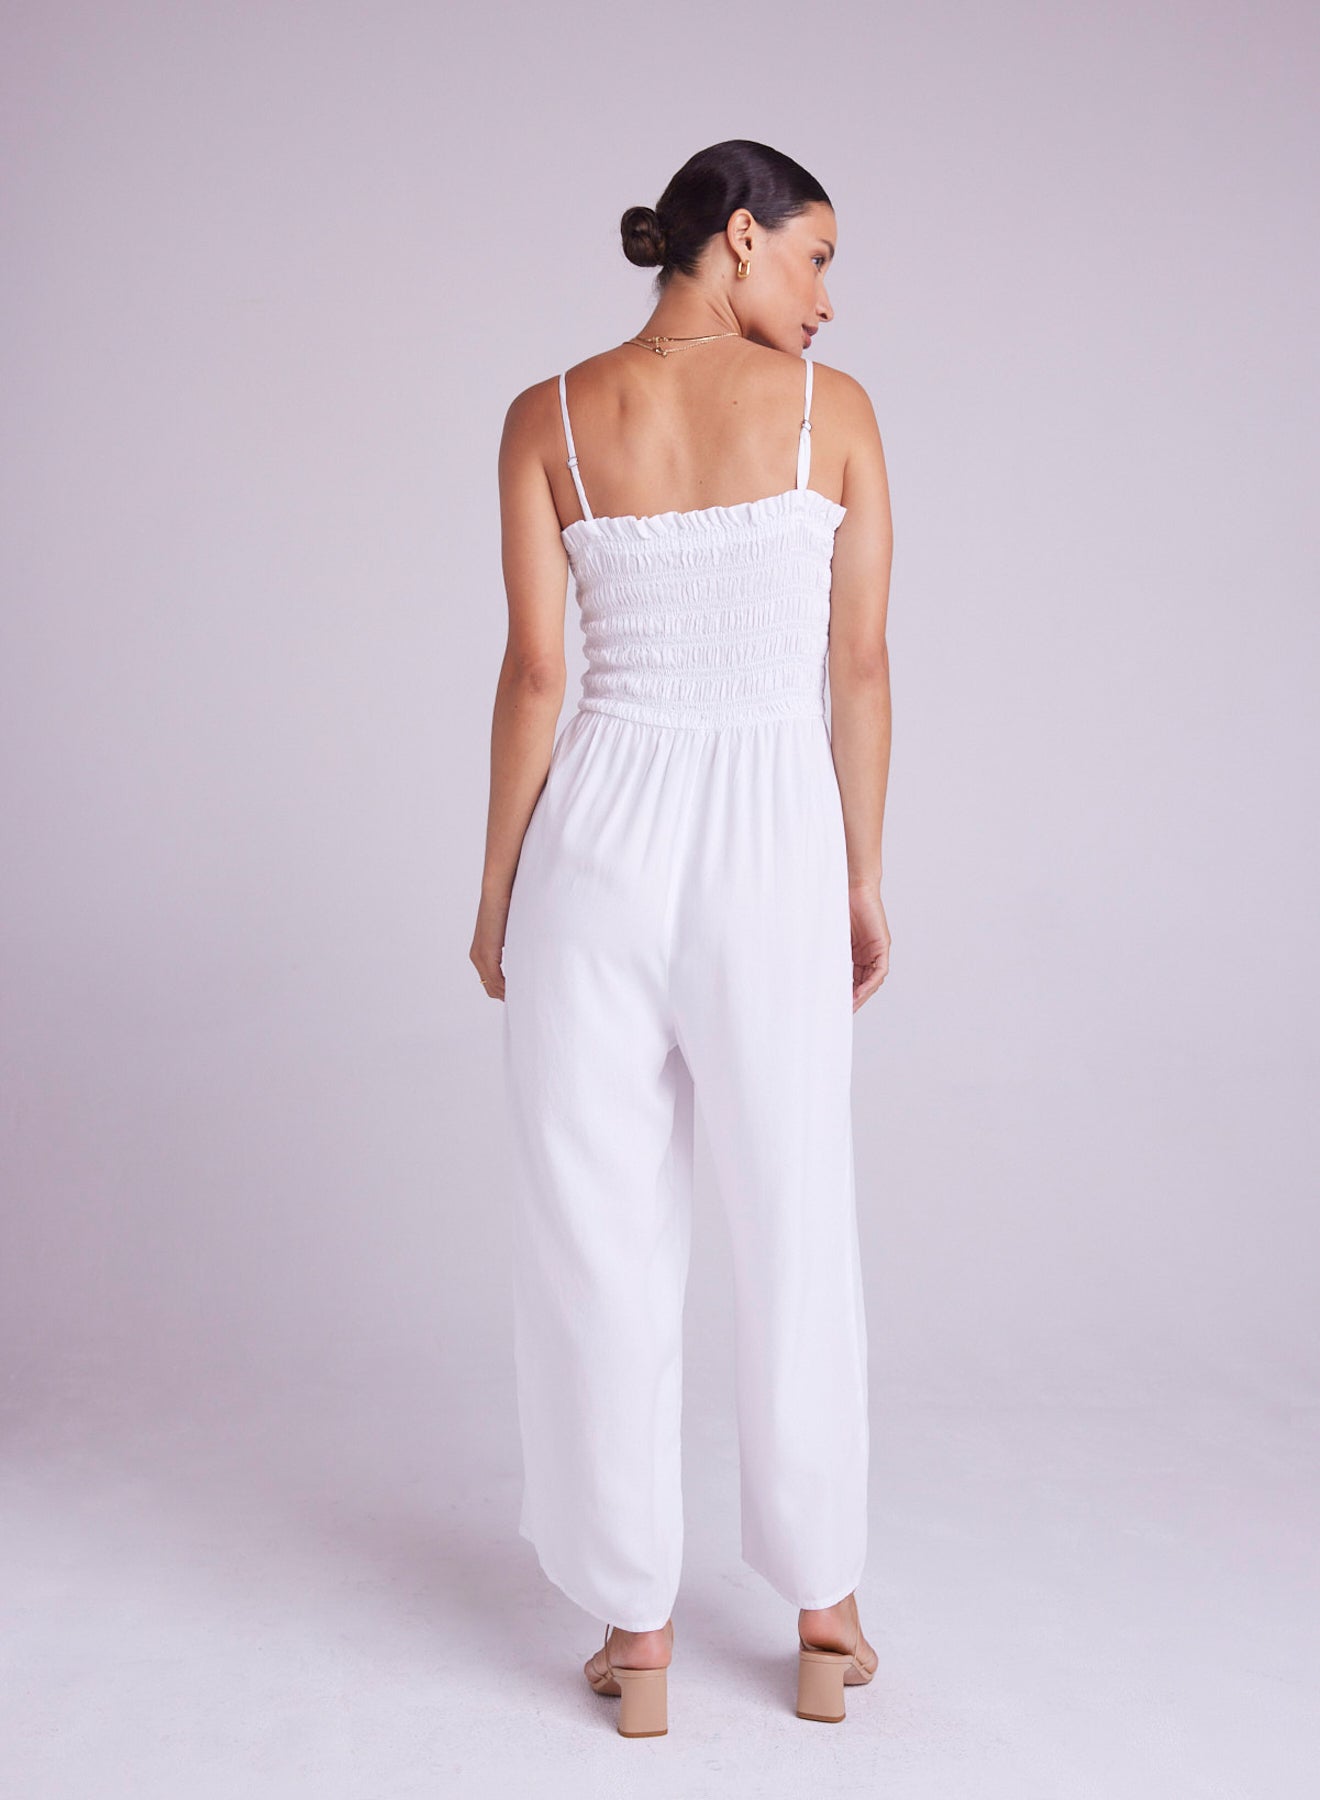 Bella DahlWide Leg Smocked Ruffle Jumpsuit - WhiteJumpsuits & Rompers